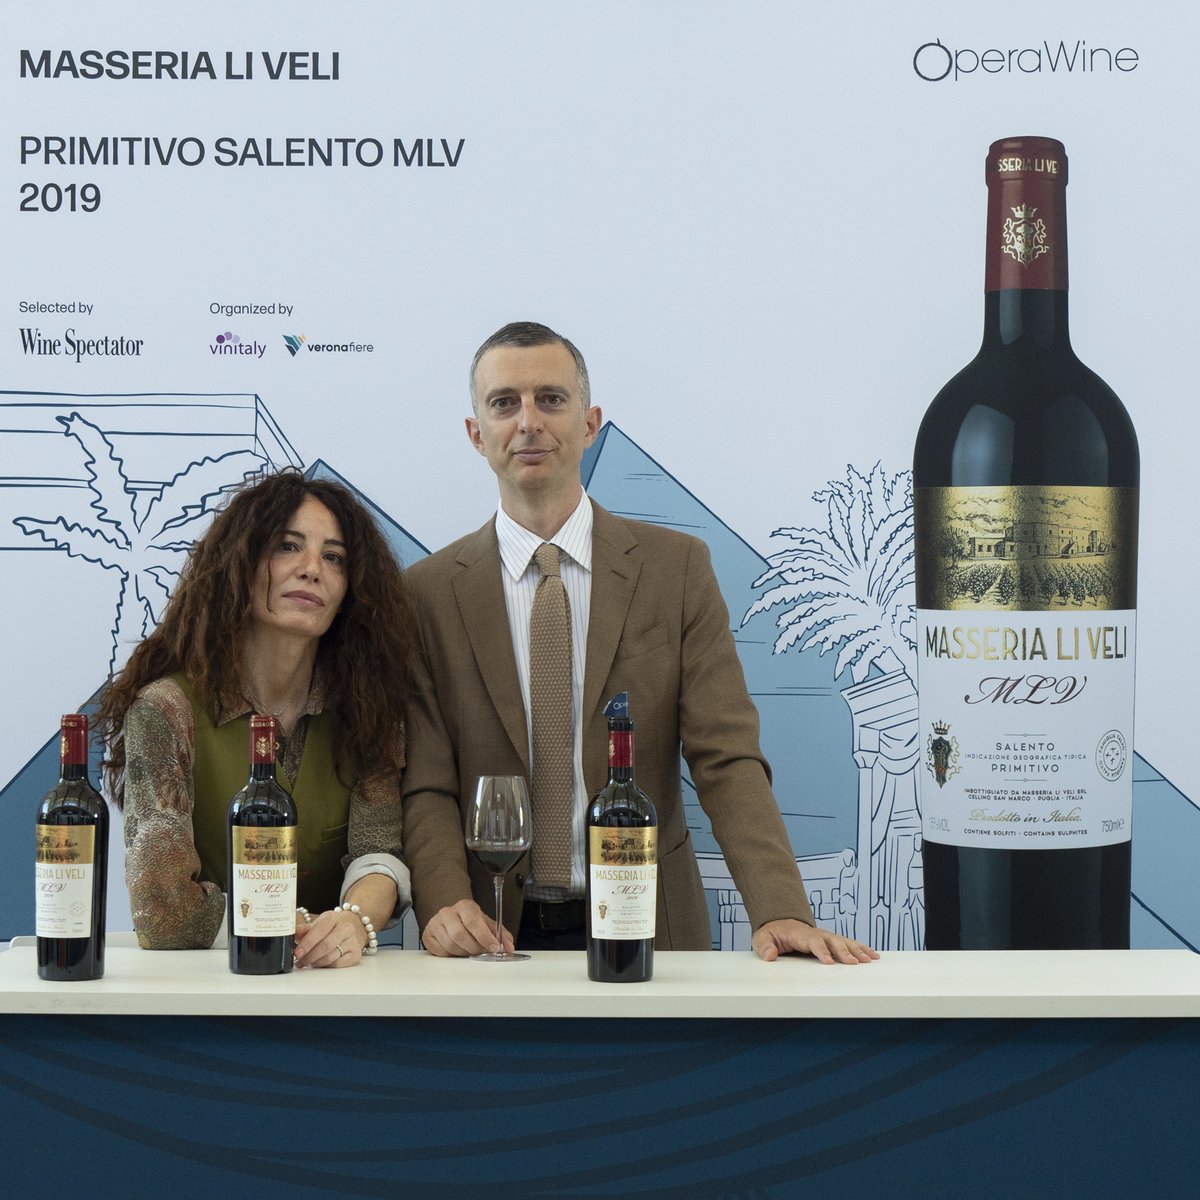 Here is the portrait of Masseria Li Veli, one of the great Italian producers selected by Wine Spectator for #OperaWine2024. During this year's Grand Tasting, they shared with guests their Primitivo Salento MLV 2019. Congratulations! #OperaWine #Vinitaly2024 #finestitalianwines